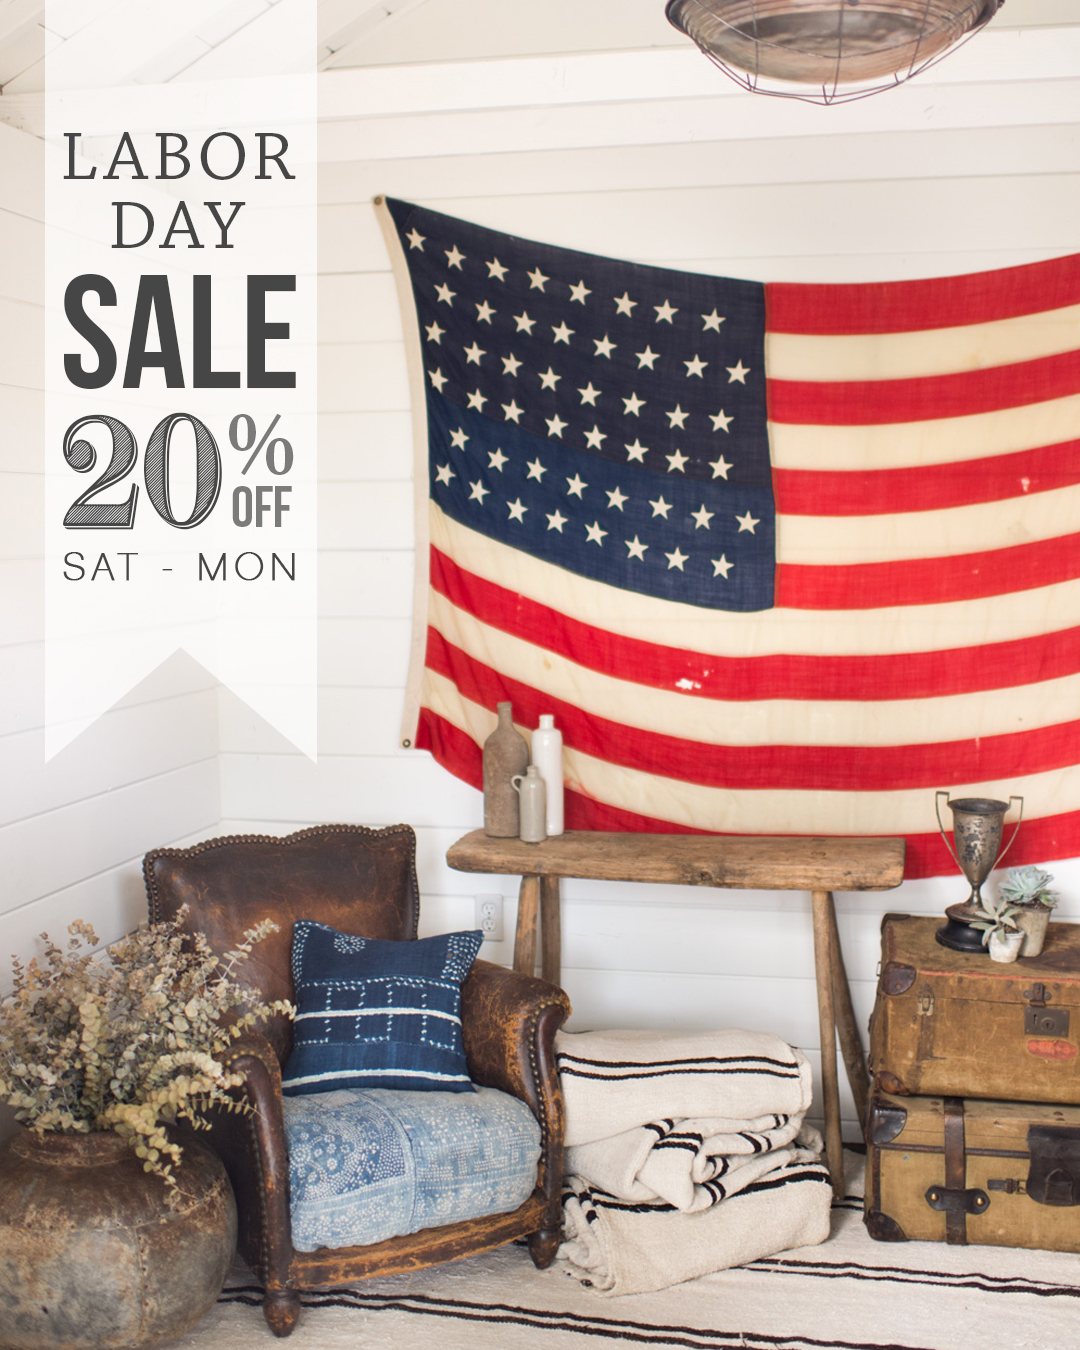 labor-day-sale-20off